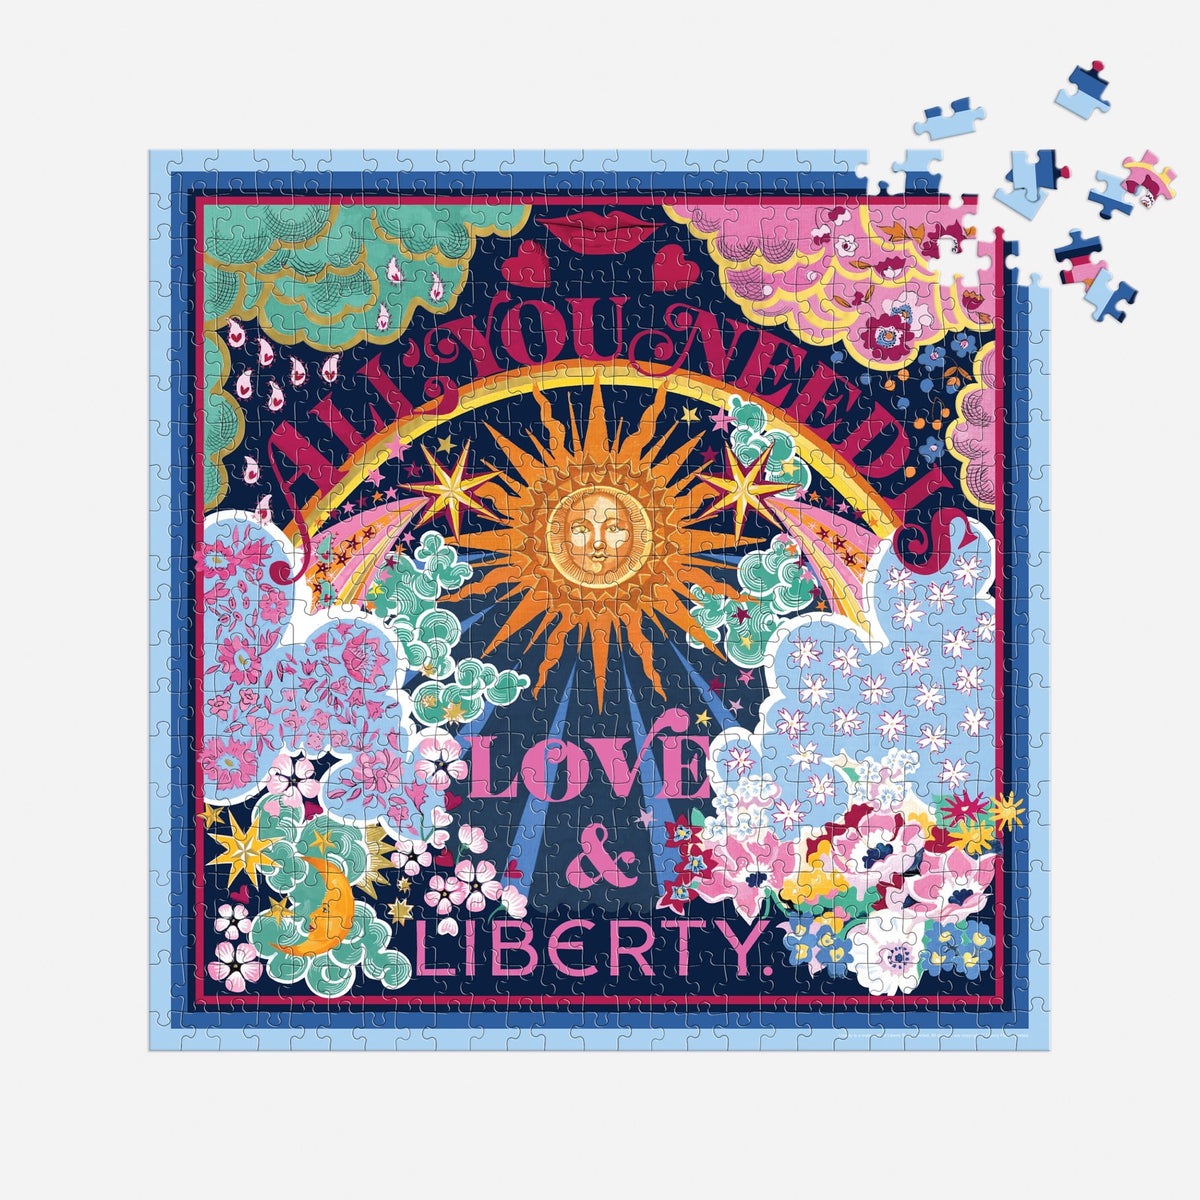 Liberty All You Need is Love 500 Piece Book Puzzle 500 Piece Puzzles Liberty of London Ltd 